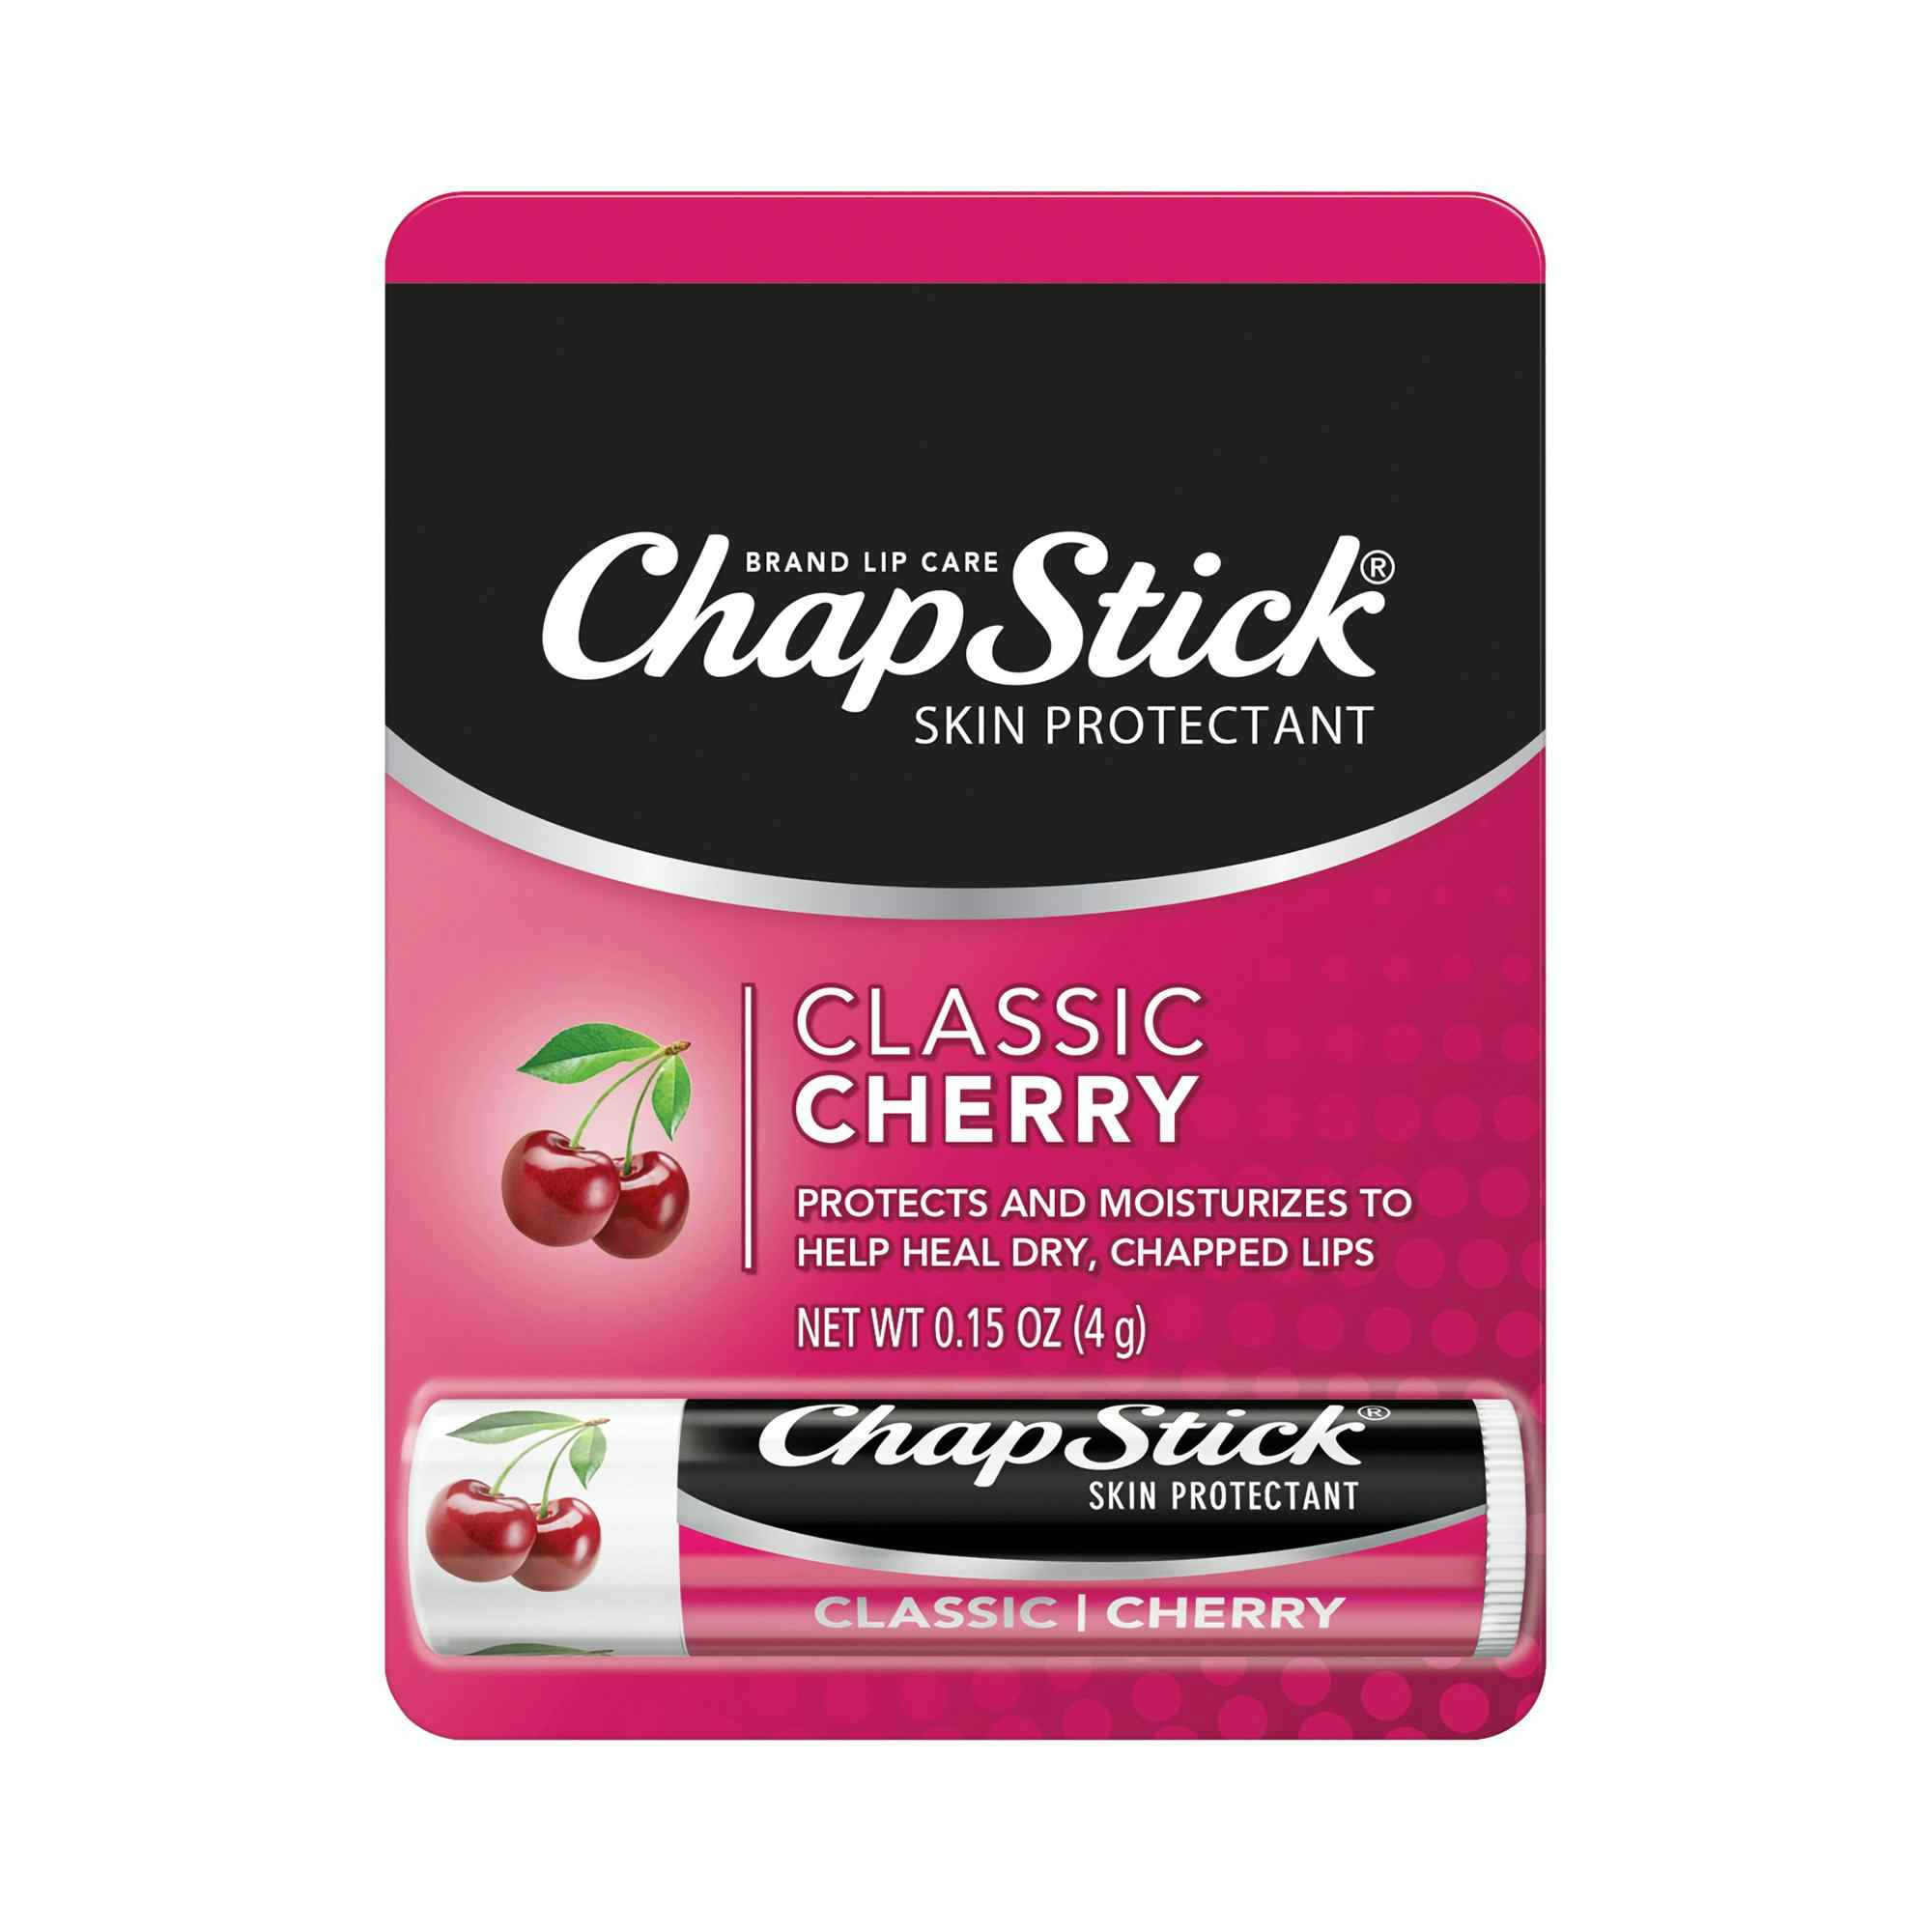 Chapstick Skin Protectant, Classic Cherry, 00573070512, 1 Each